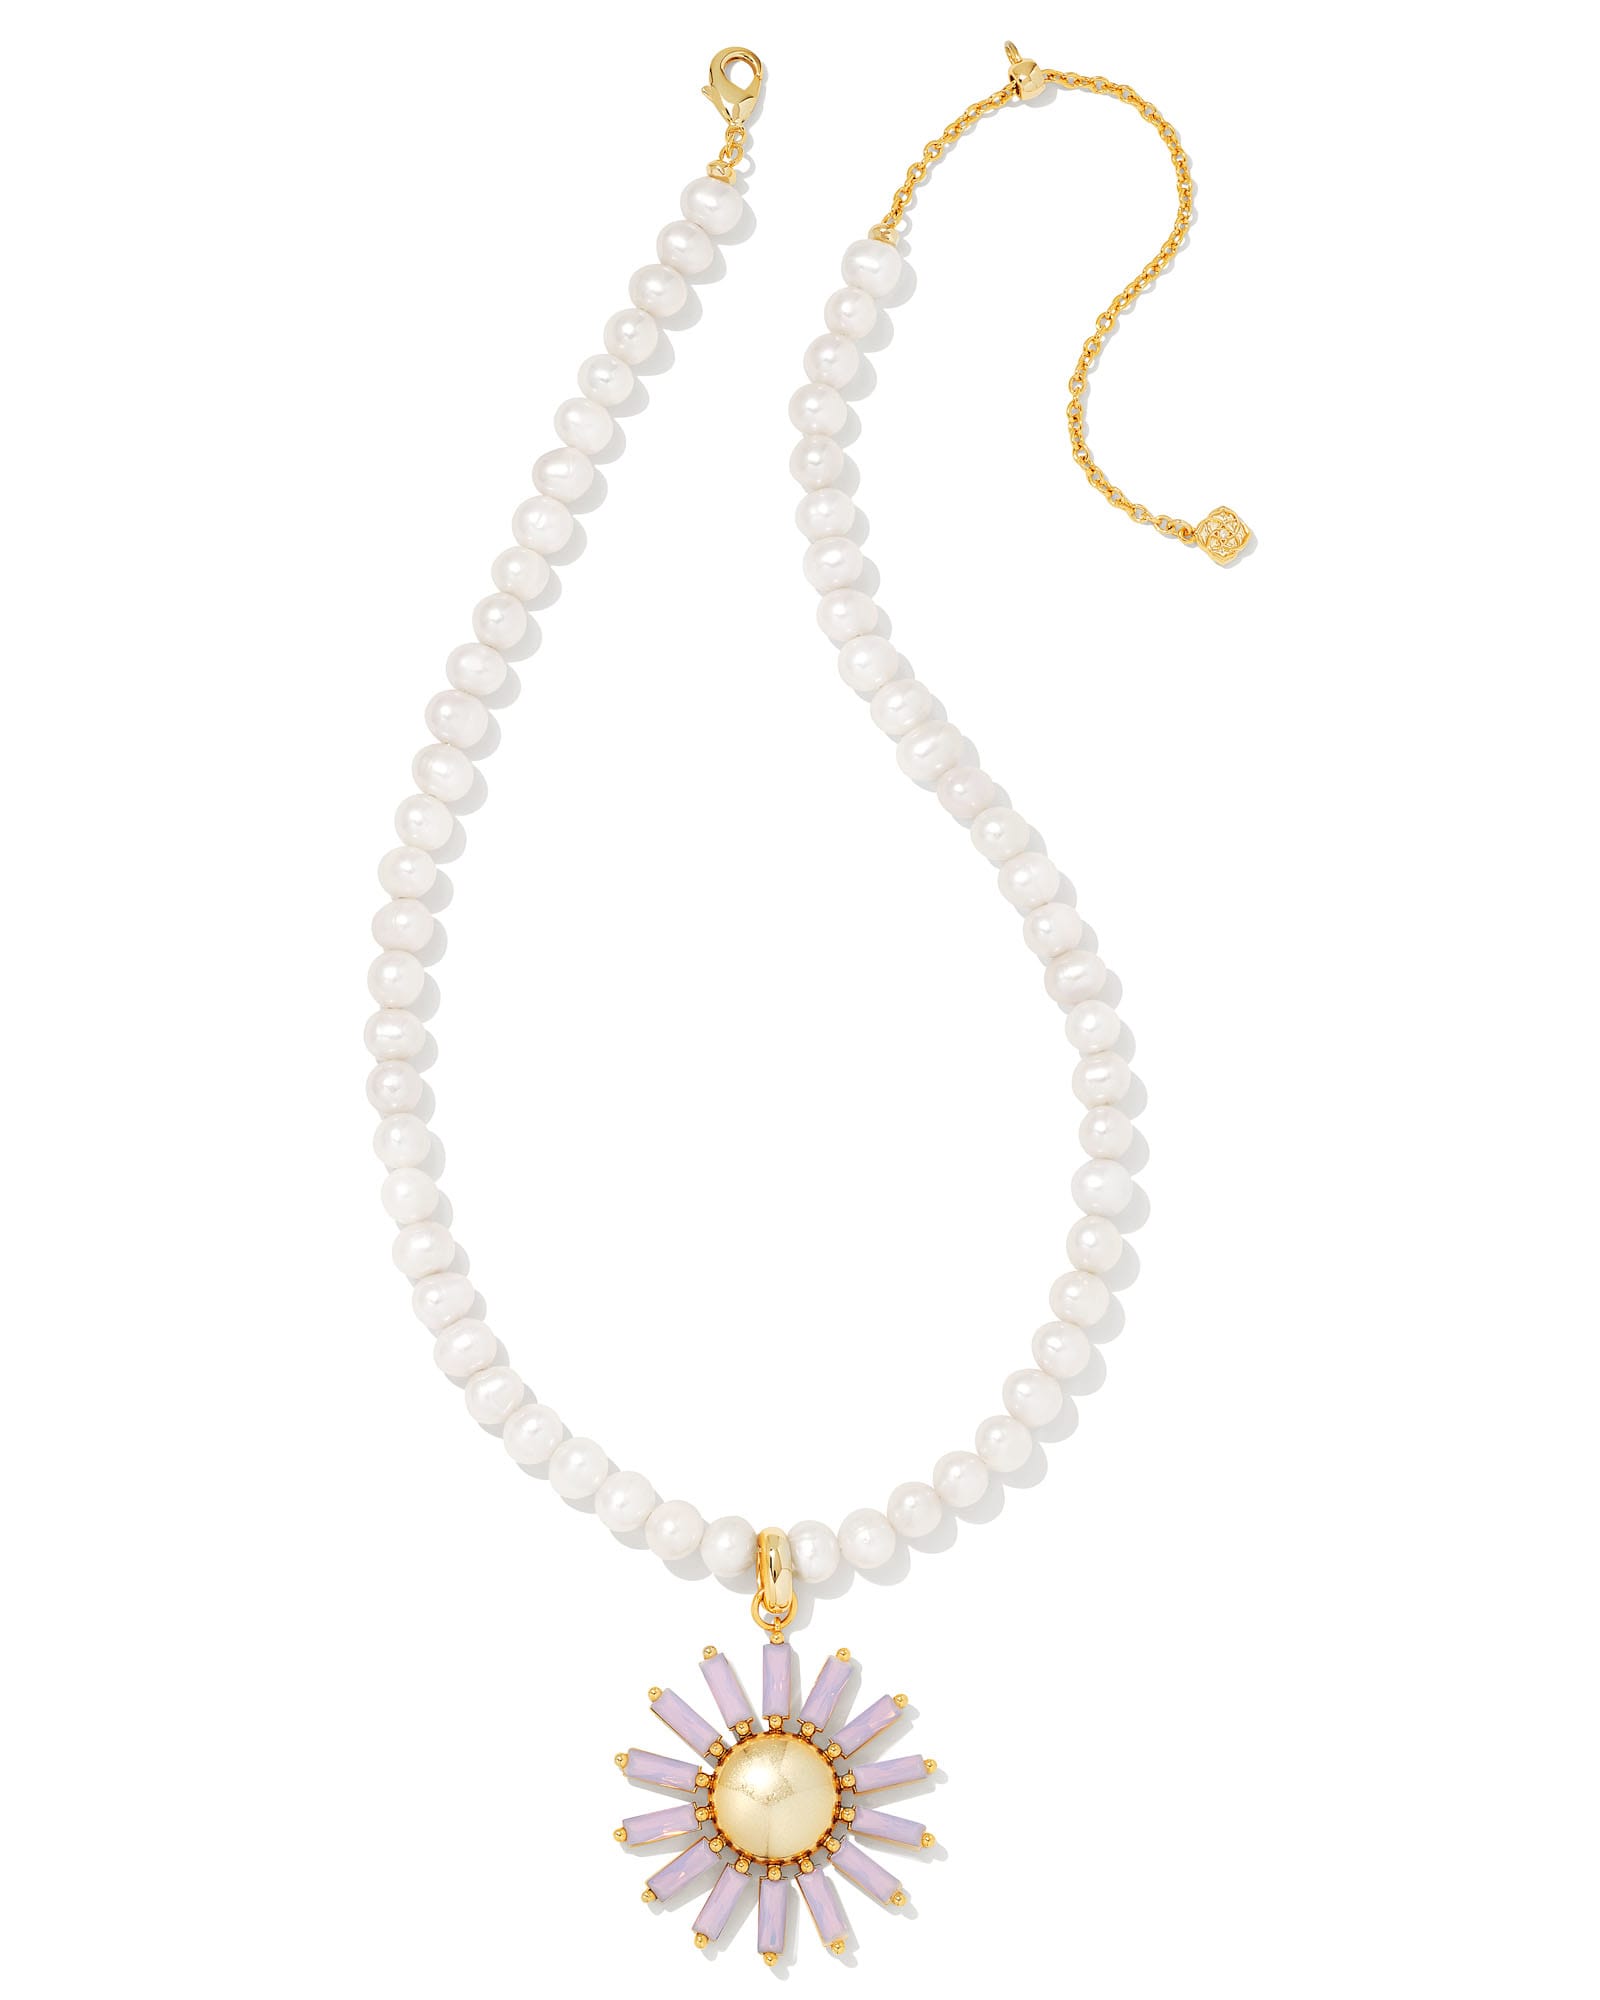 Kendra Scott Madison Daisy Convertible Gold Pearl Statement Necklace in Pink Opal Crystal | Nanogems